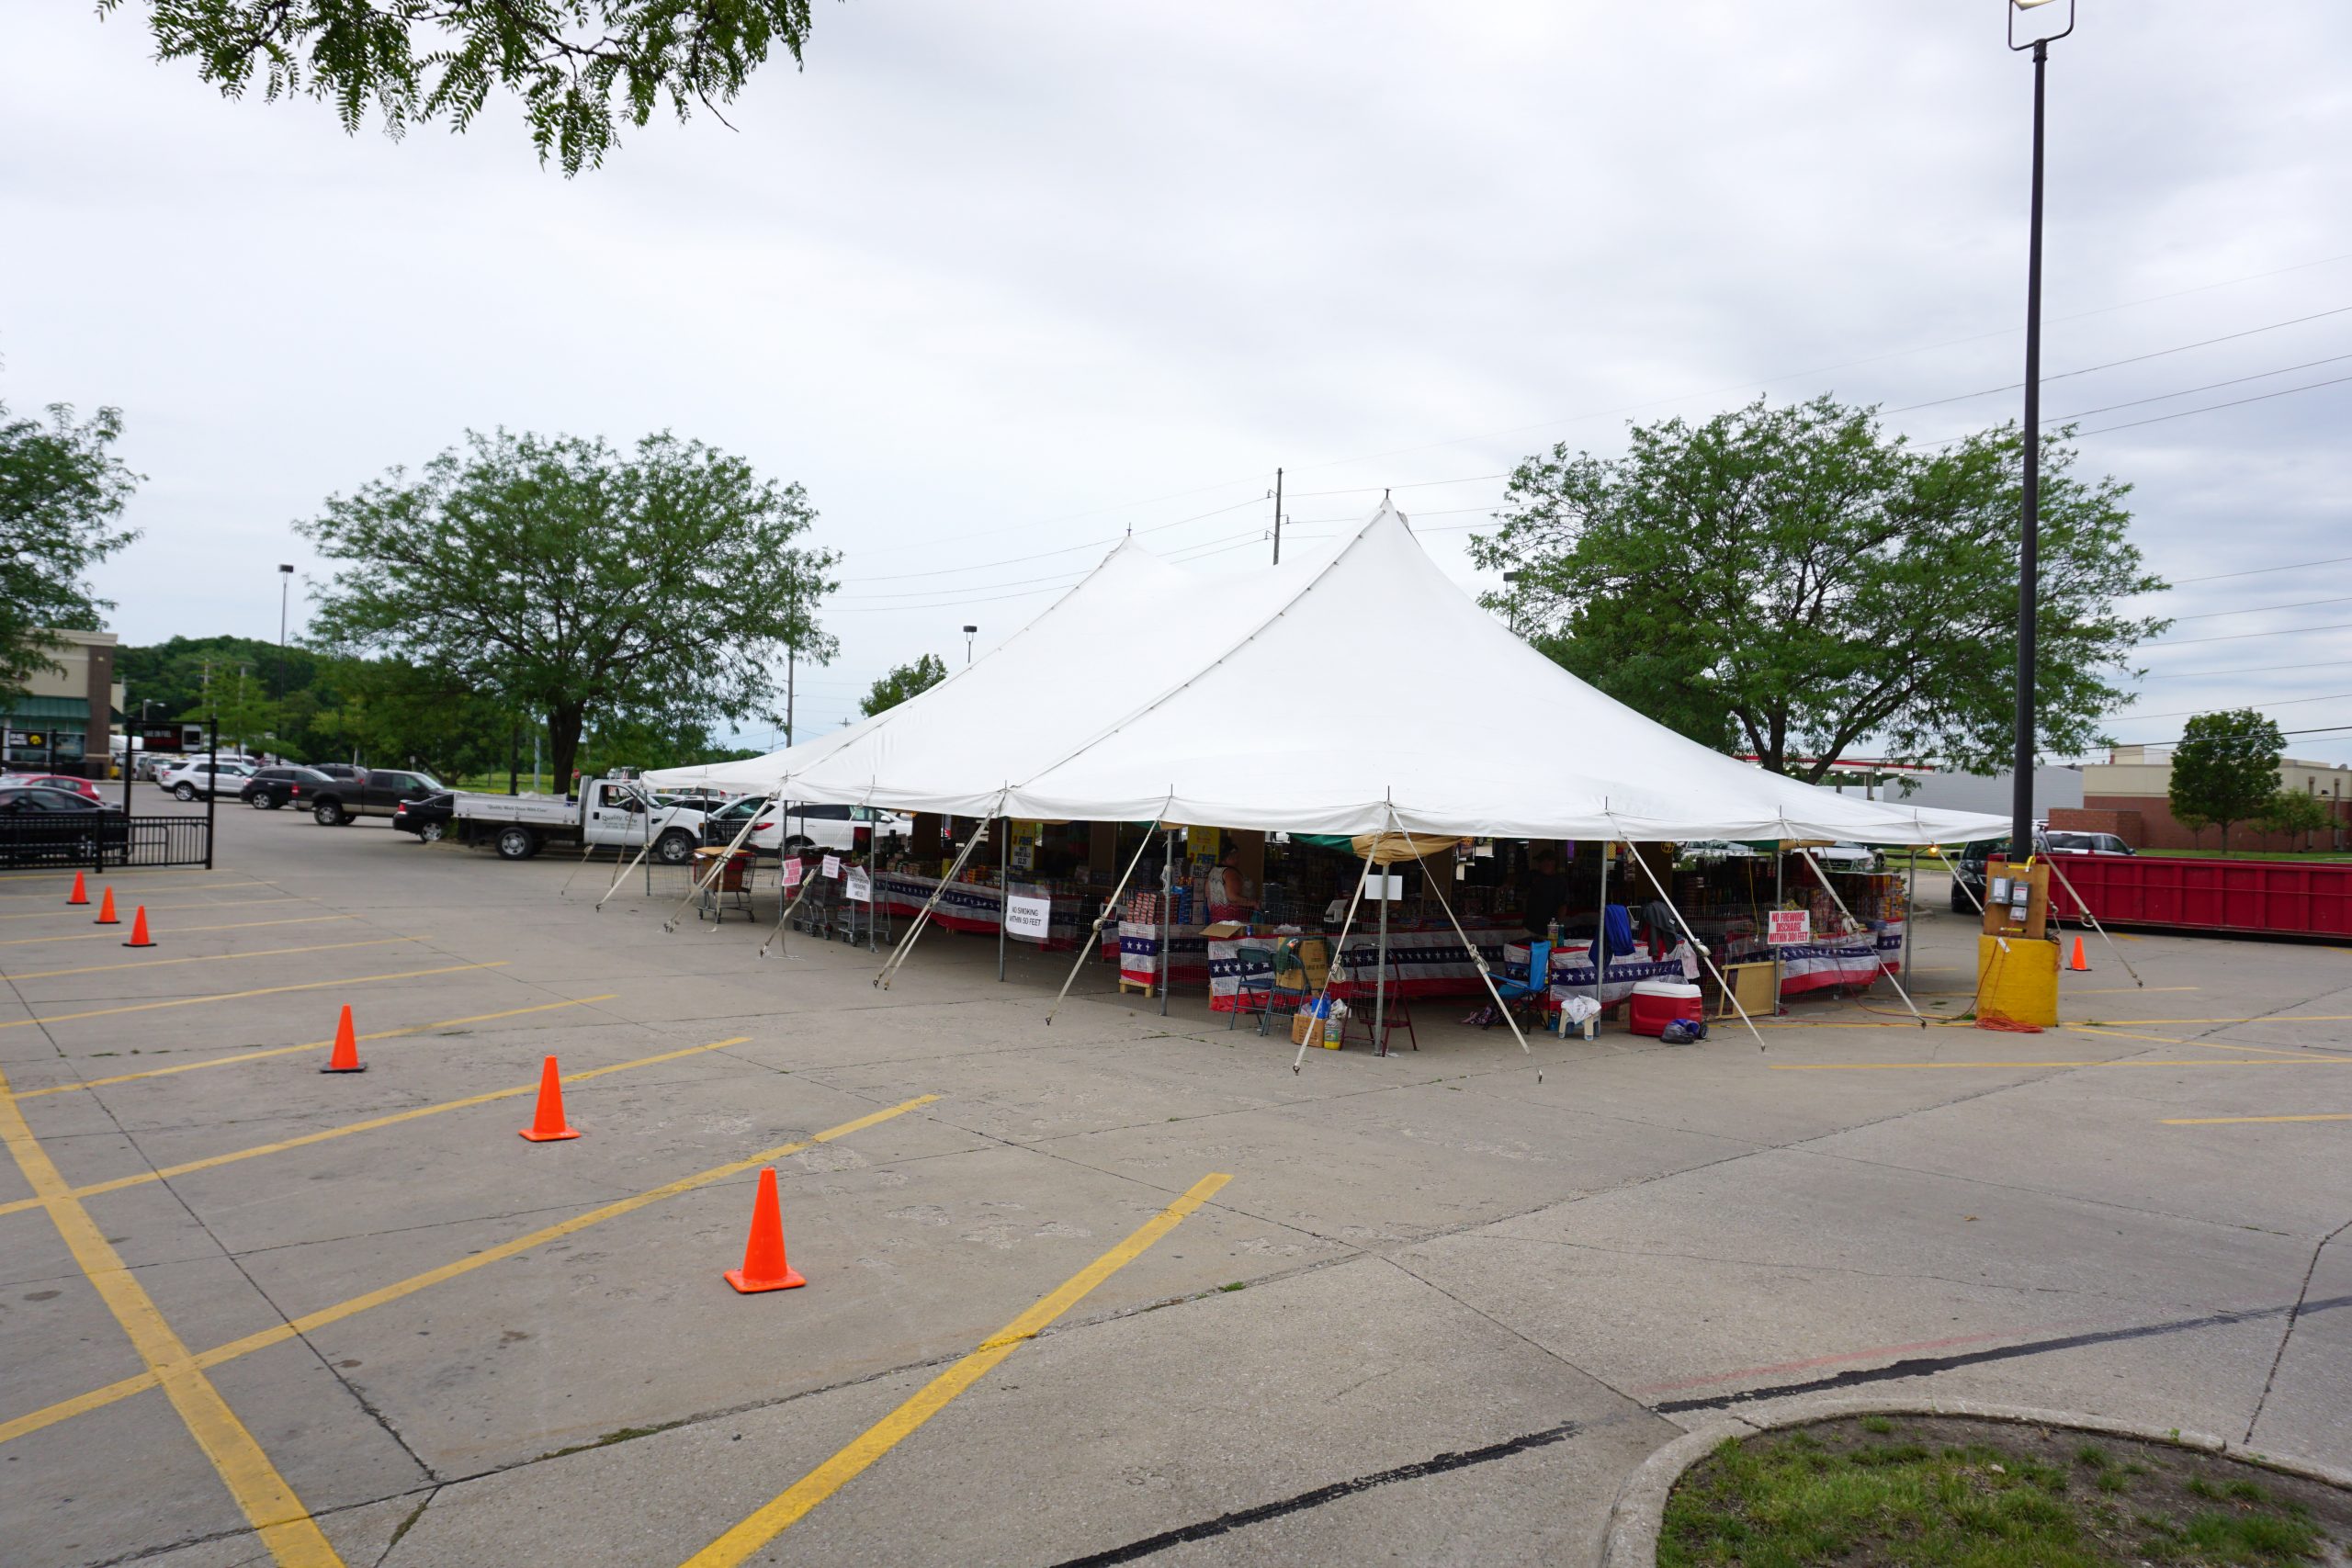 40' x 60' rope and pole tent for Fireworks Stand Hy-Vee 1720 Waterfront Dr, Iowa City, IA 52240